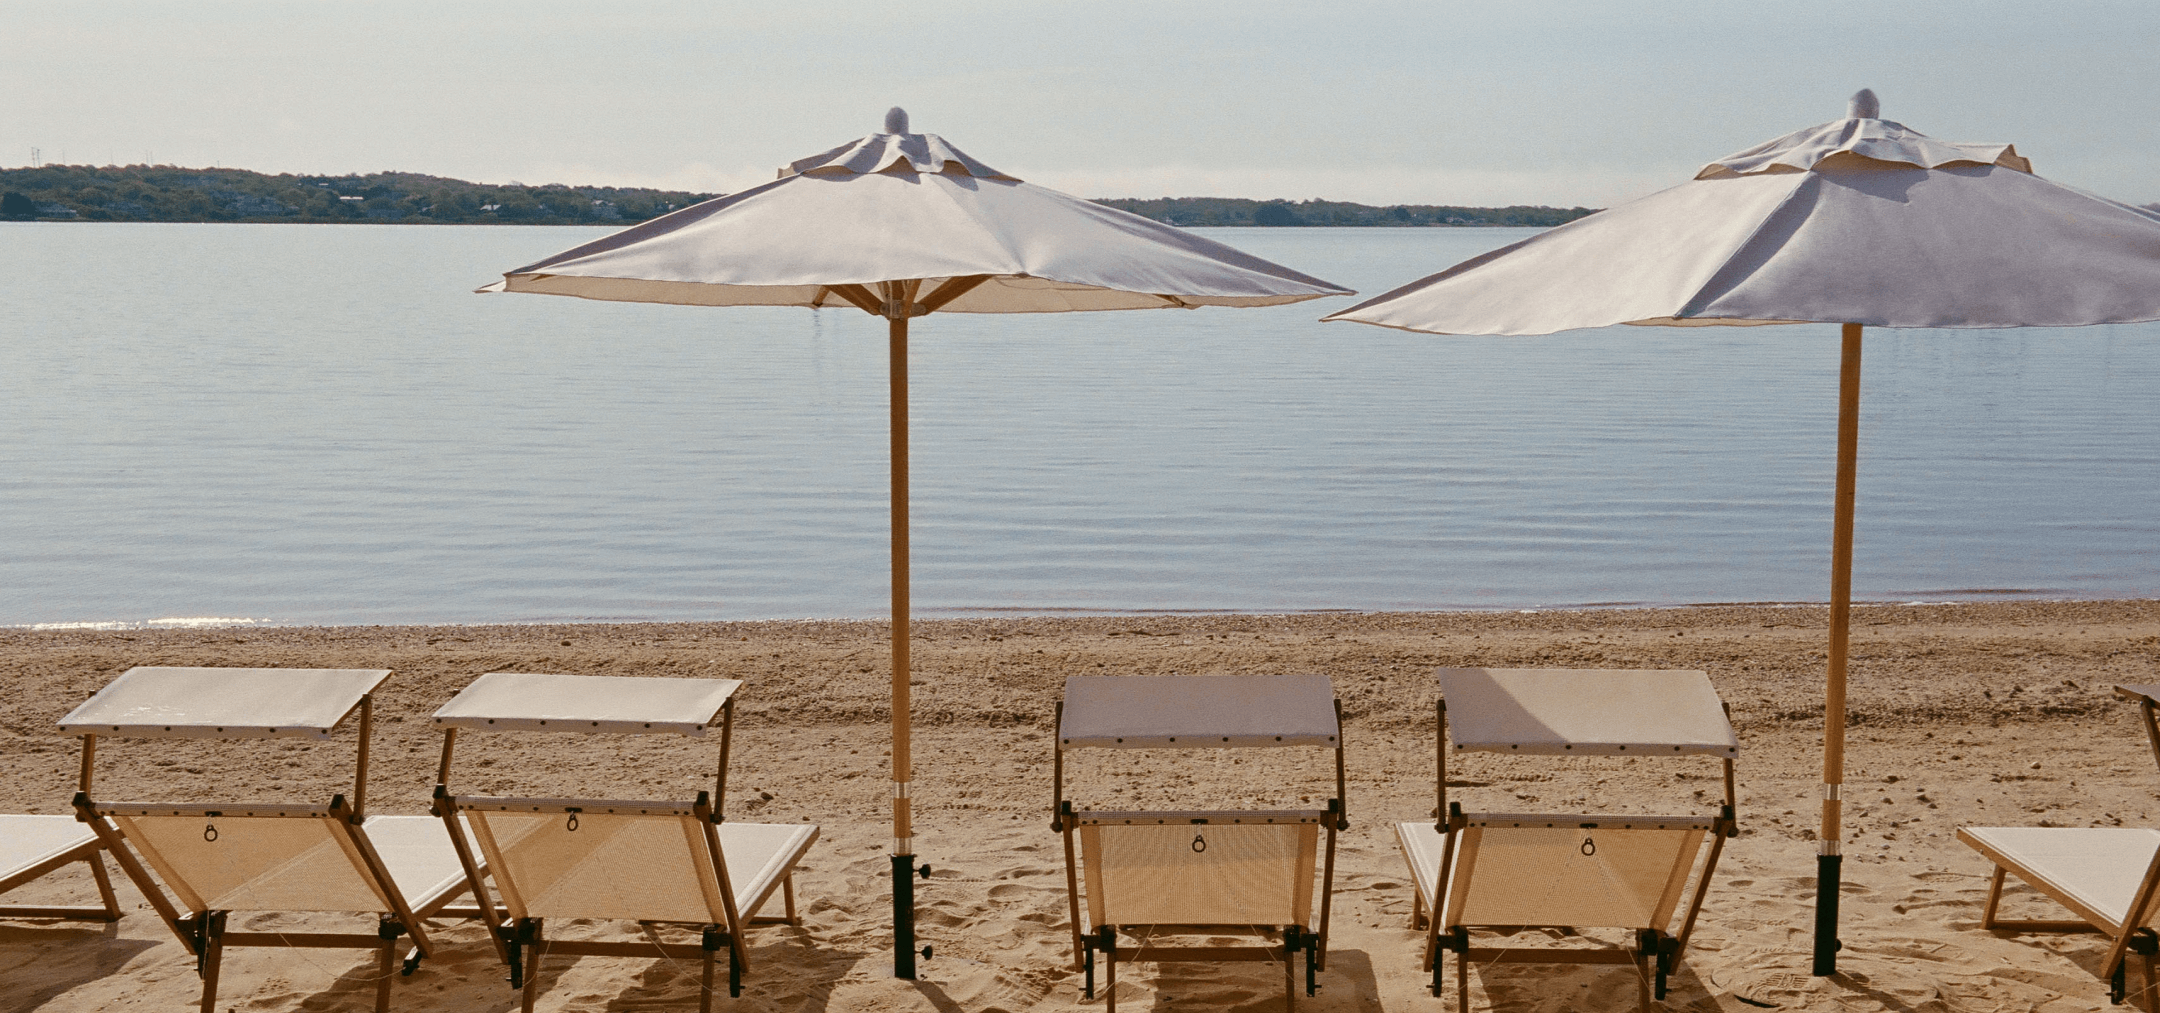 Numerous lounge chairs are positioned along the seashore, offering a wonderful view of the sea.